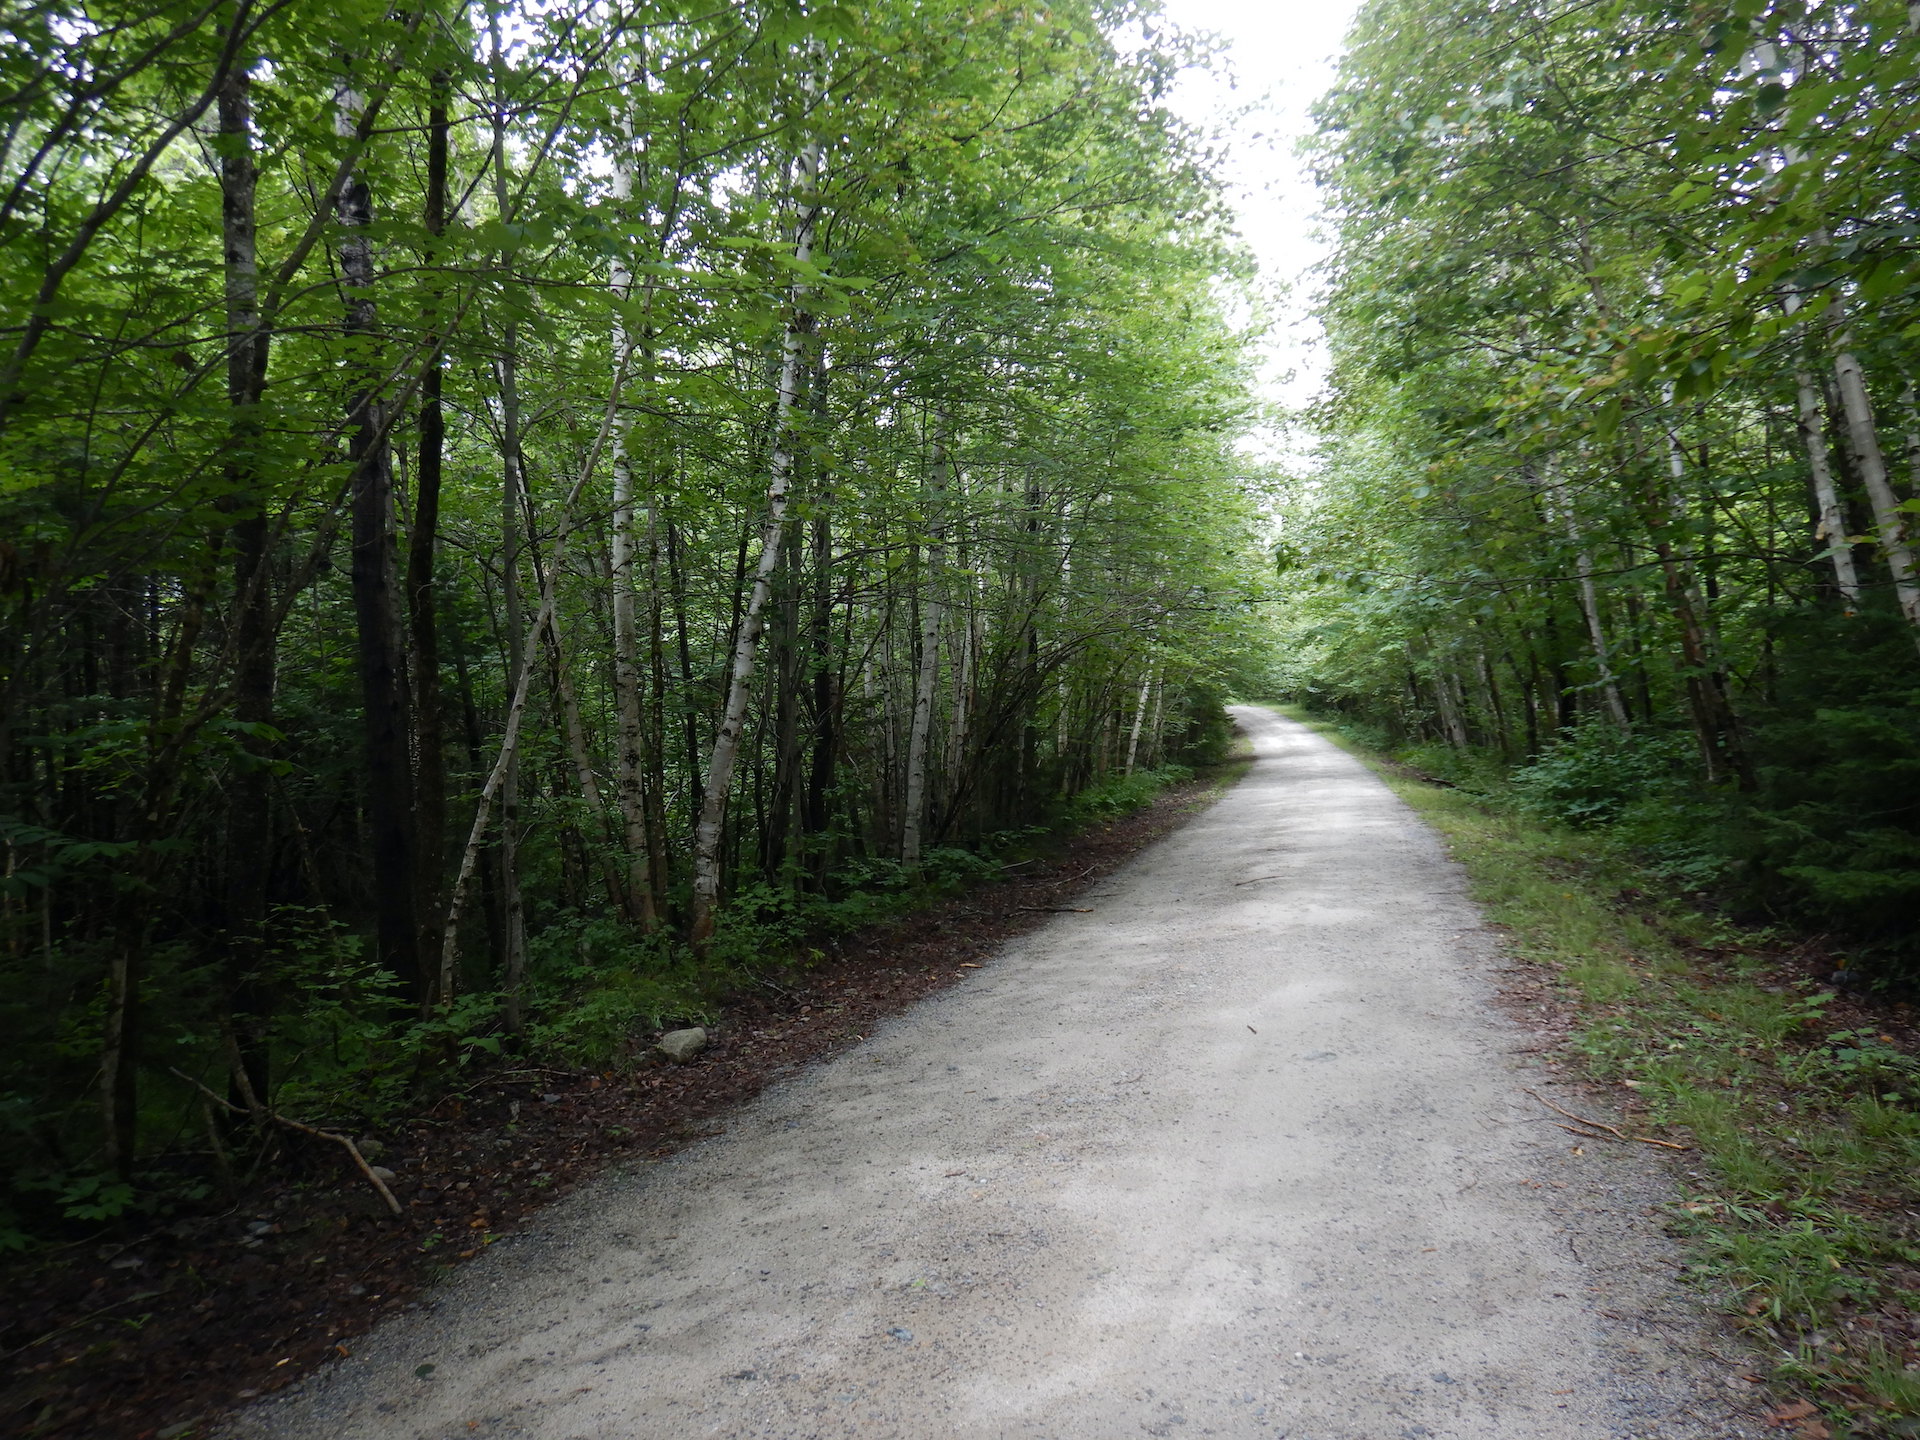 Gravel road surrounded by white-barked birch and other trees.